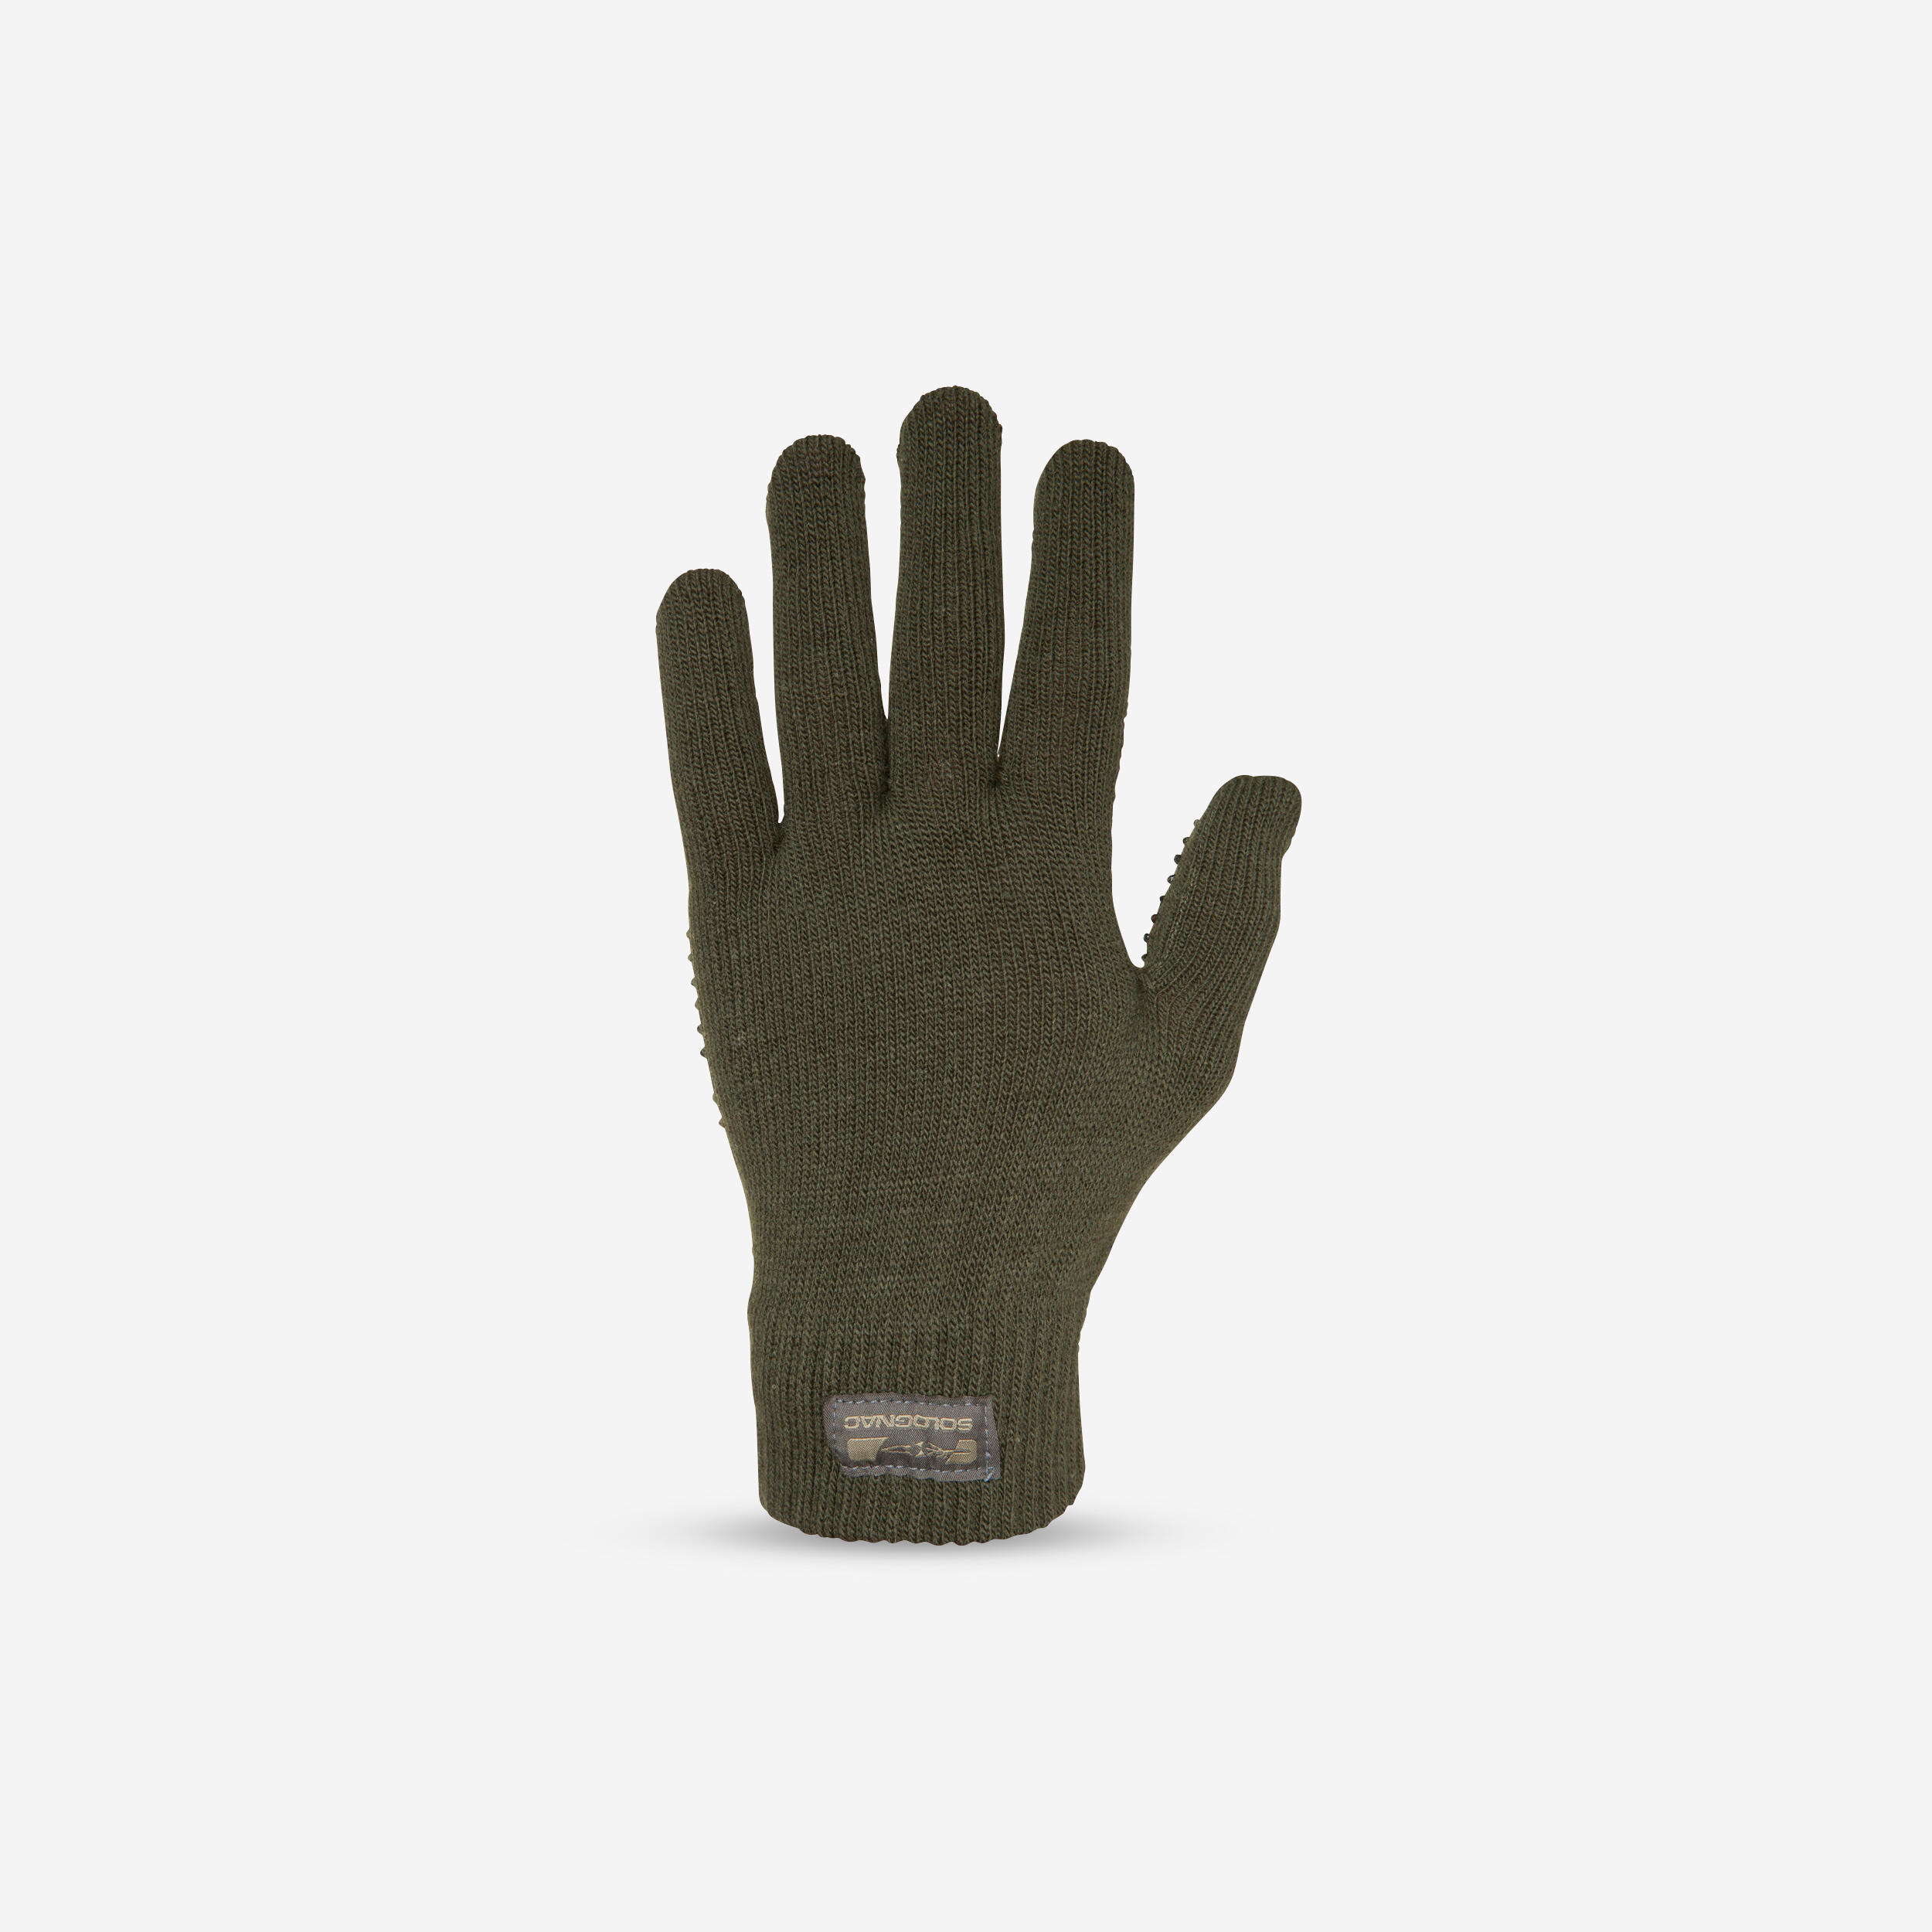 Shooting Glove – Prois Hunting